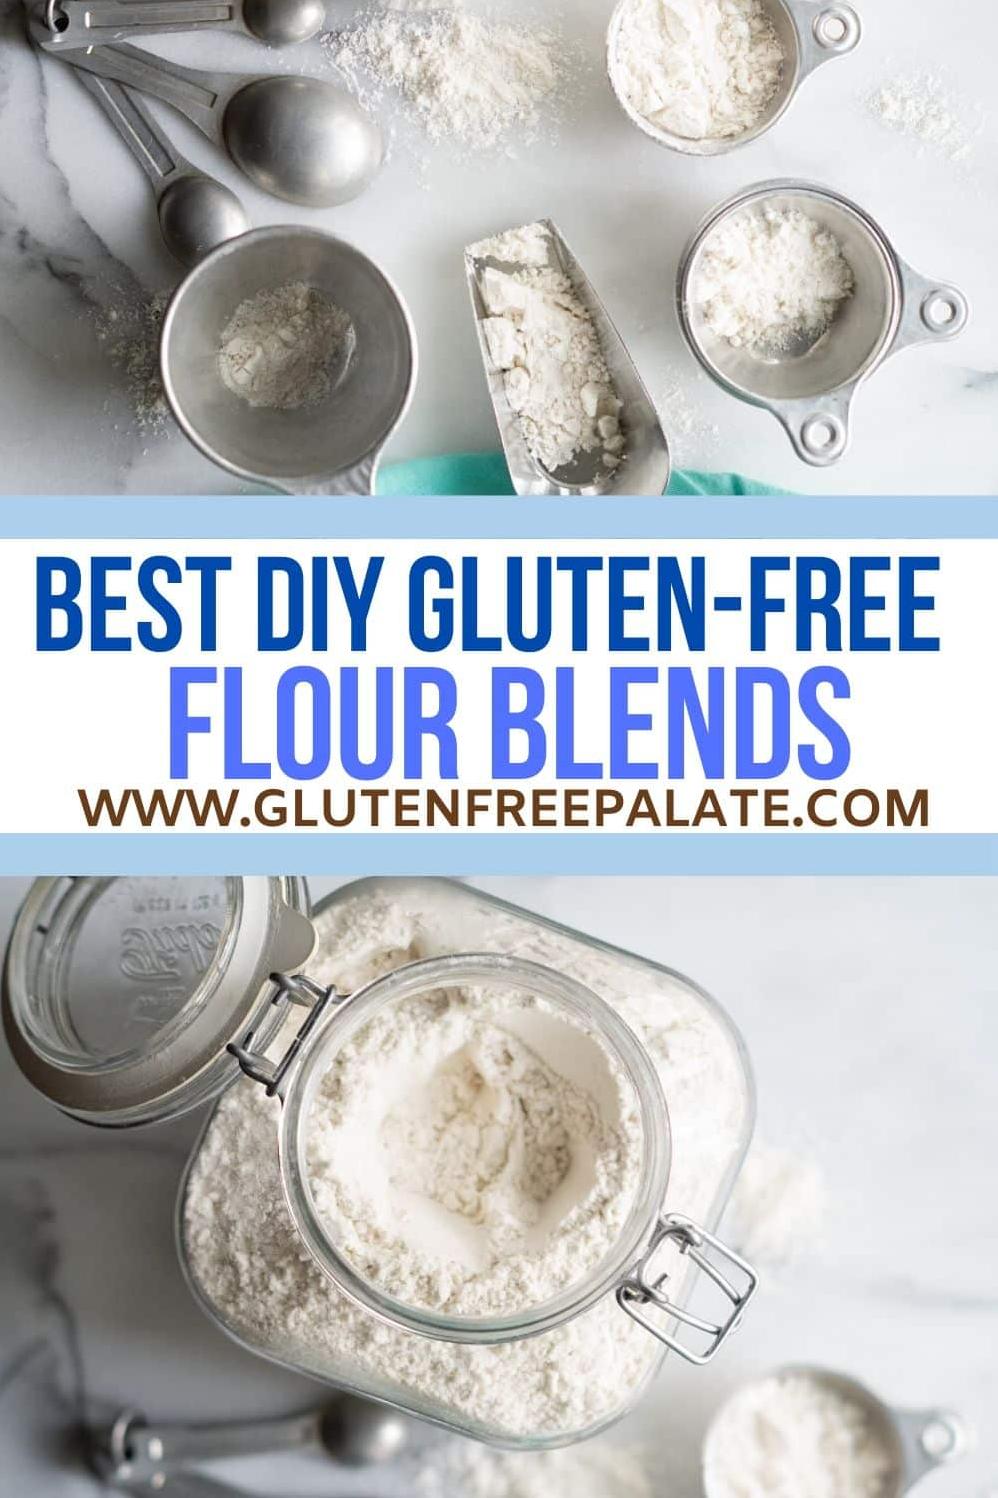  Swap out wheat flour for this gluten-free alternative and see the difference for yourself!